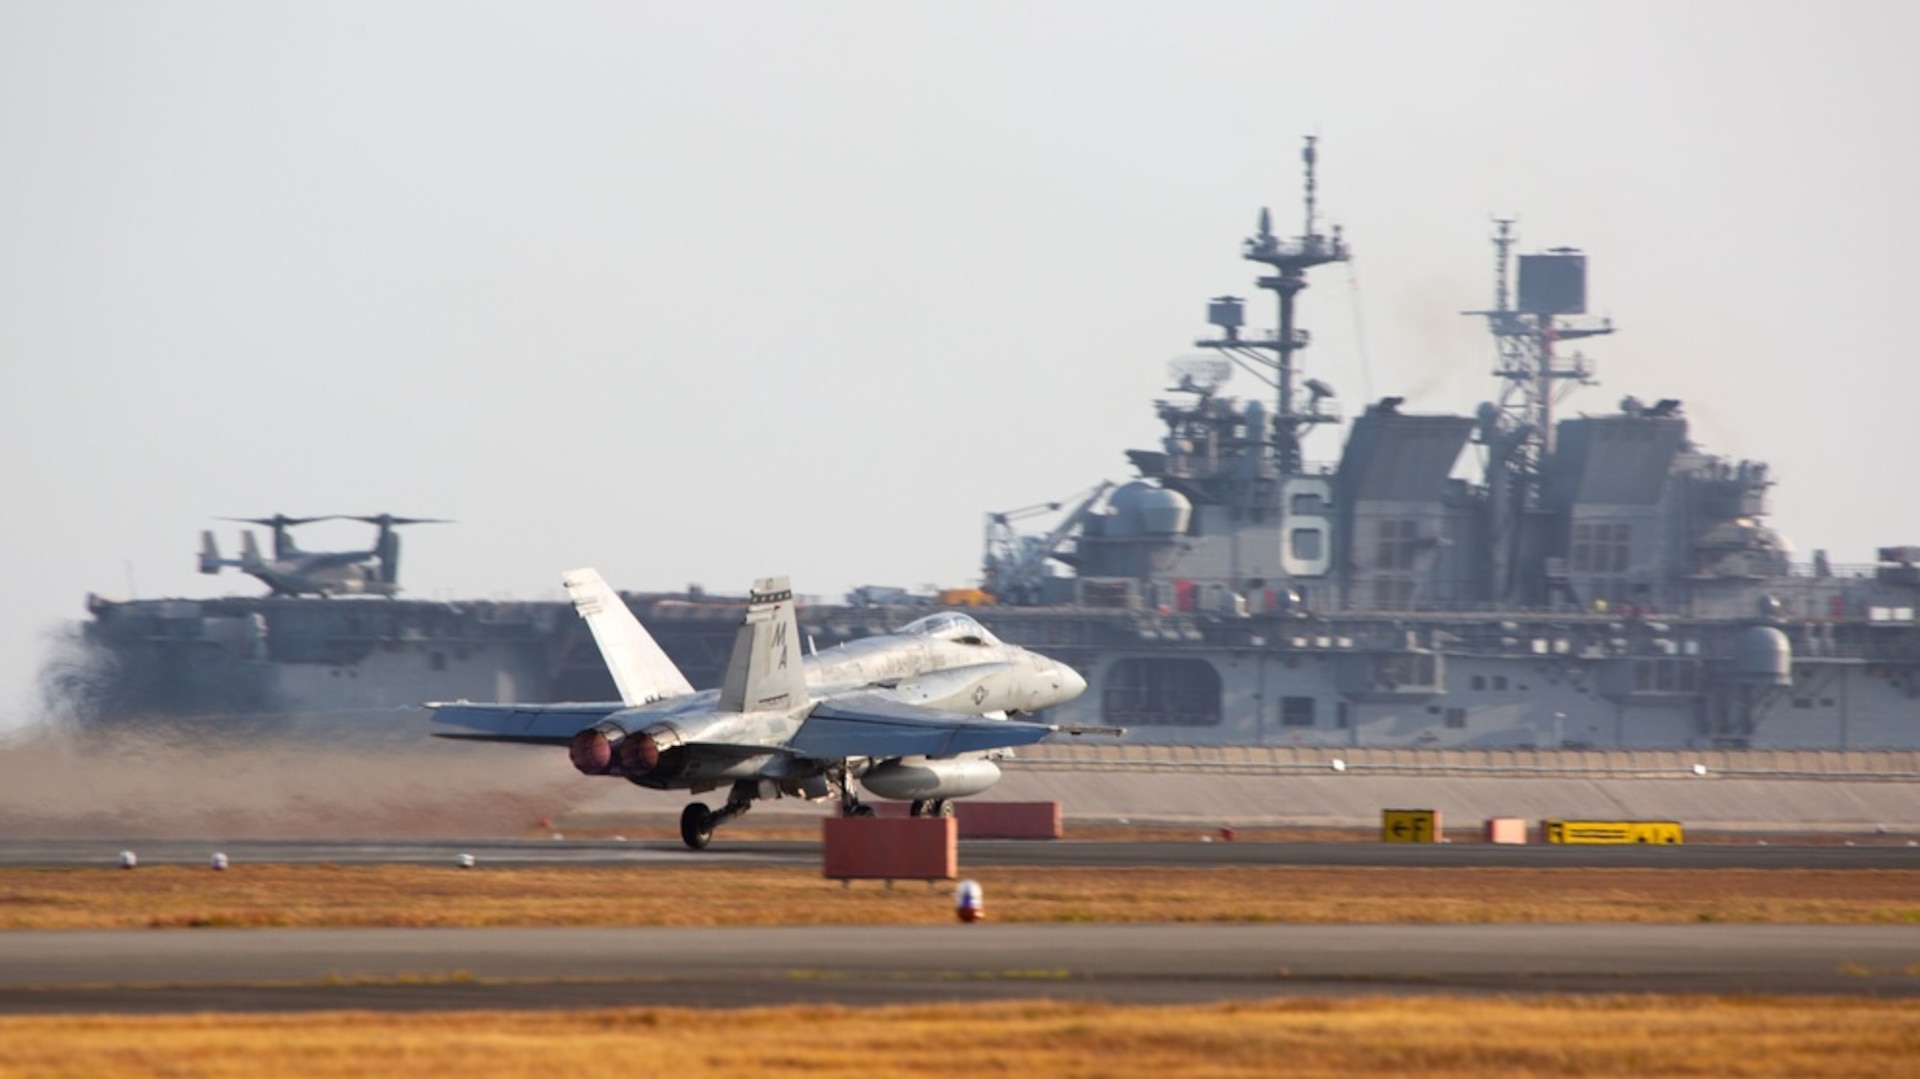 A U.S. Marine Corps F/A-18C Hornet aircraft with Marine Fighter Attack Squadron 112 takes off from Marine Corps Air Station (MCAS) Iwakuni, Japan, Nov. 18, 2021. VMFA-112 participated in a joint maritime strike rehearsal with the U.S. Navy off the coast of Okinawa, Nov 19, 2021. U.S. Marines with VMFA-112 routinely train and rehearse joint maritime mission sets in order to maintain readiness to carry out a wide range of operational tasks in a region characterized by vast oceans, seas, and waterways.